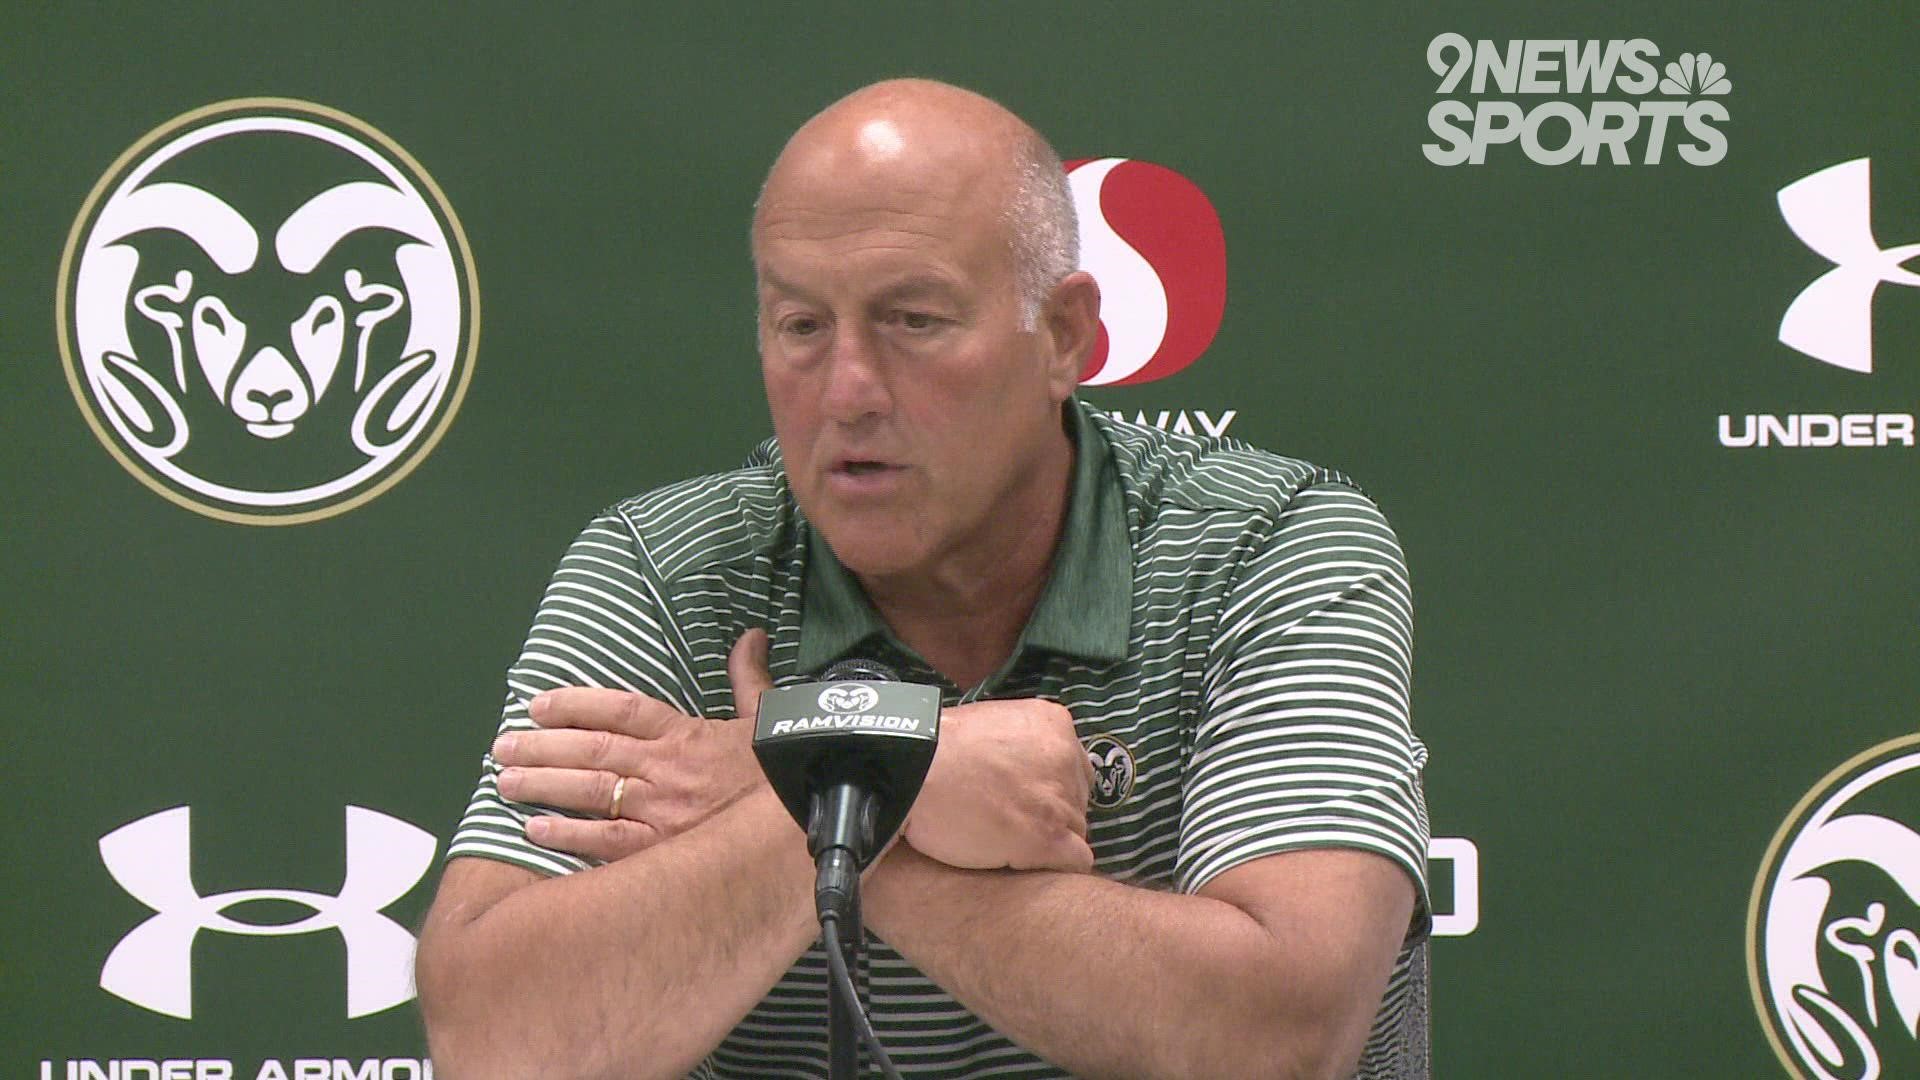 At his press conference on Monday, Rams head coach Steve Addazio said his team is "not naïve" and knows just how difficult Saturday's game will be.